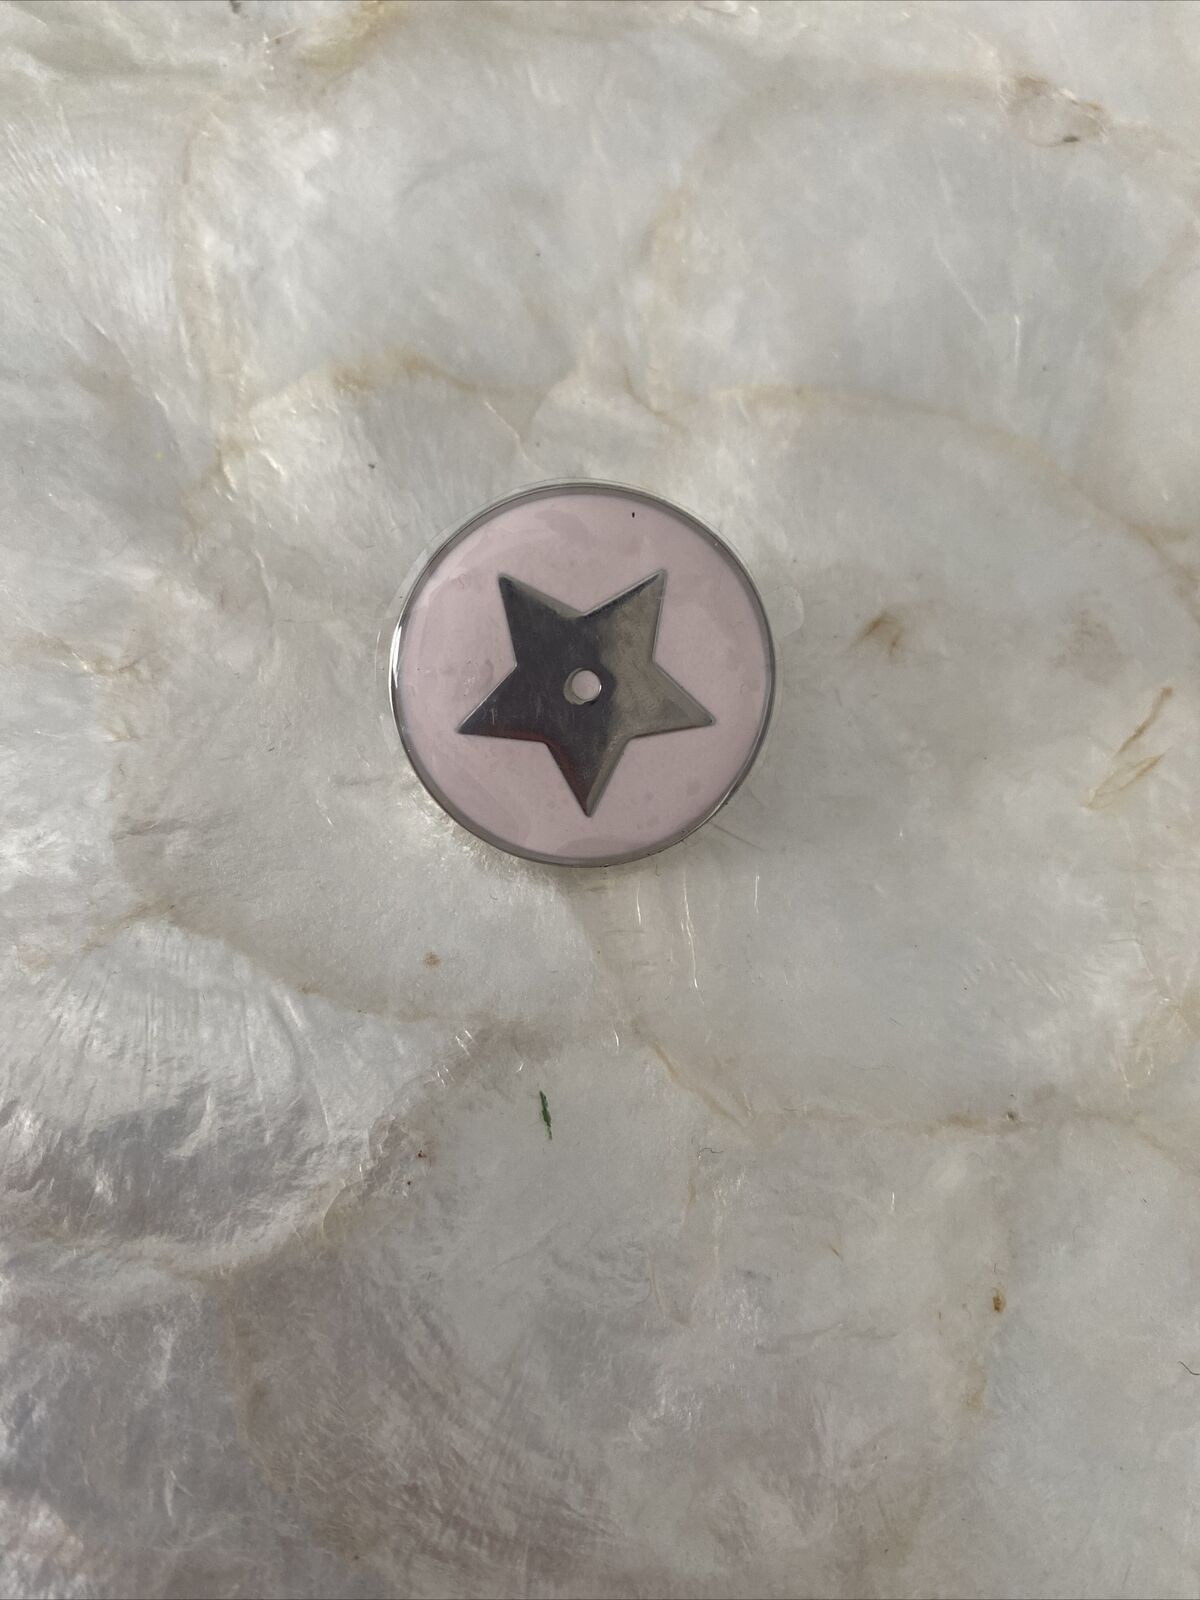 AUTHENTIC CHRISTIAN DIOR PINK & SILVER DIOR STAR PIN BADGE JEWELLERY NEW